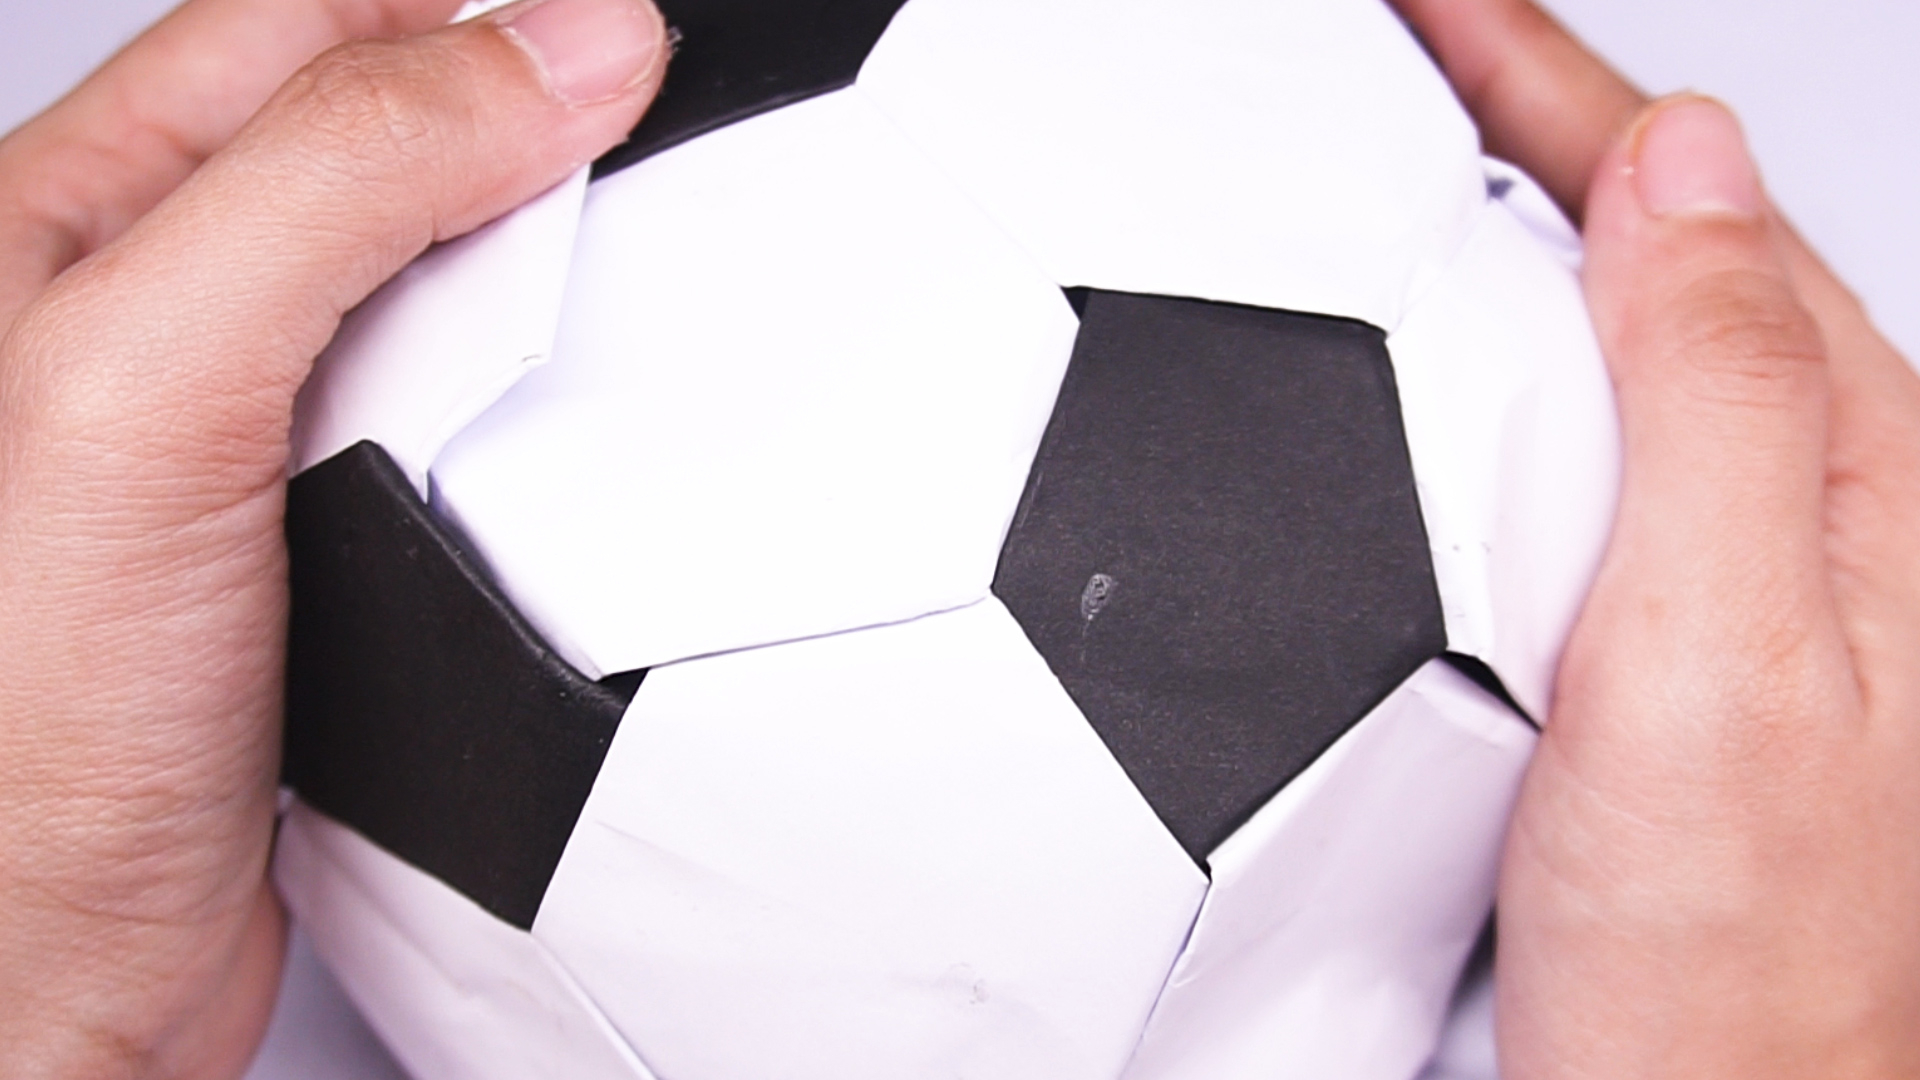 How To Make Origami Ball 3 Ways To Make An Origami Soccer Ball Wikihow